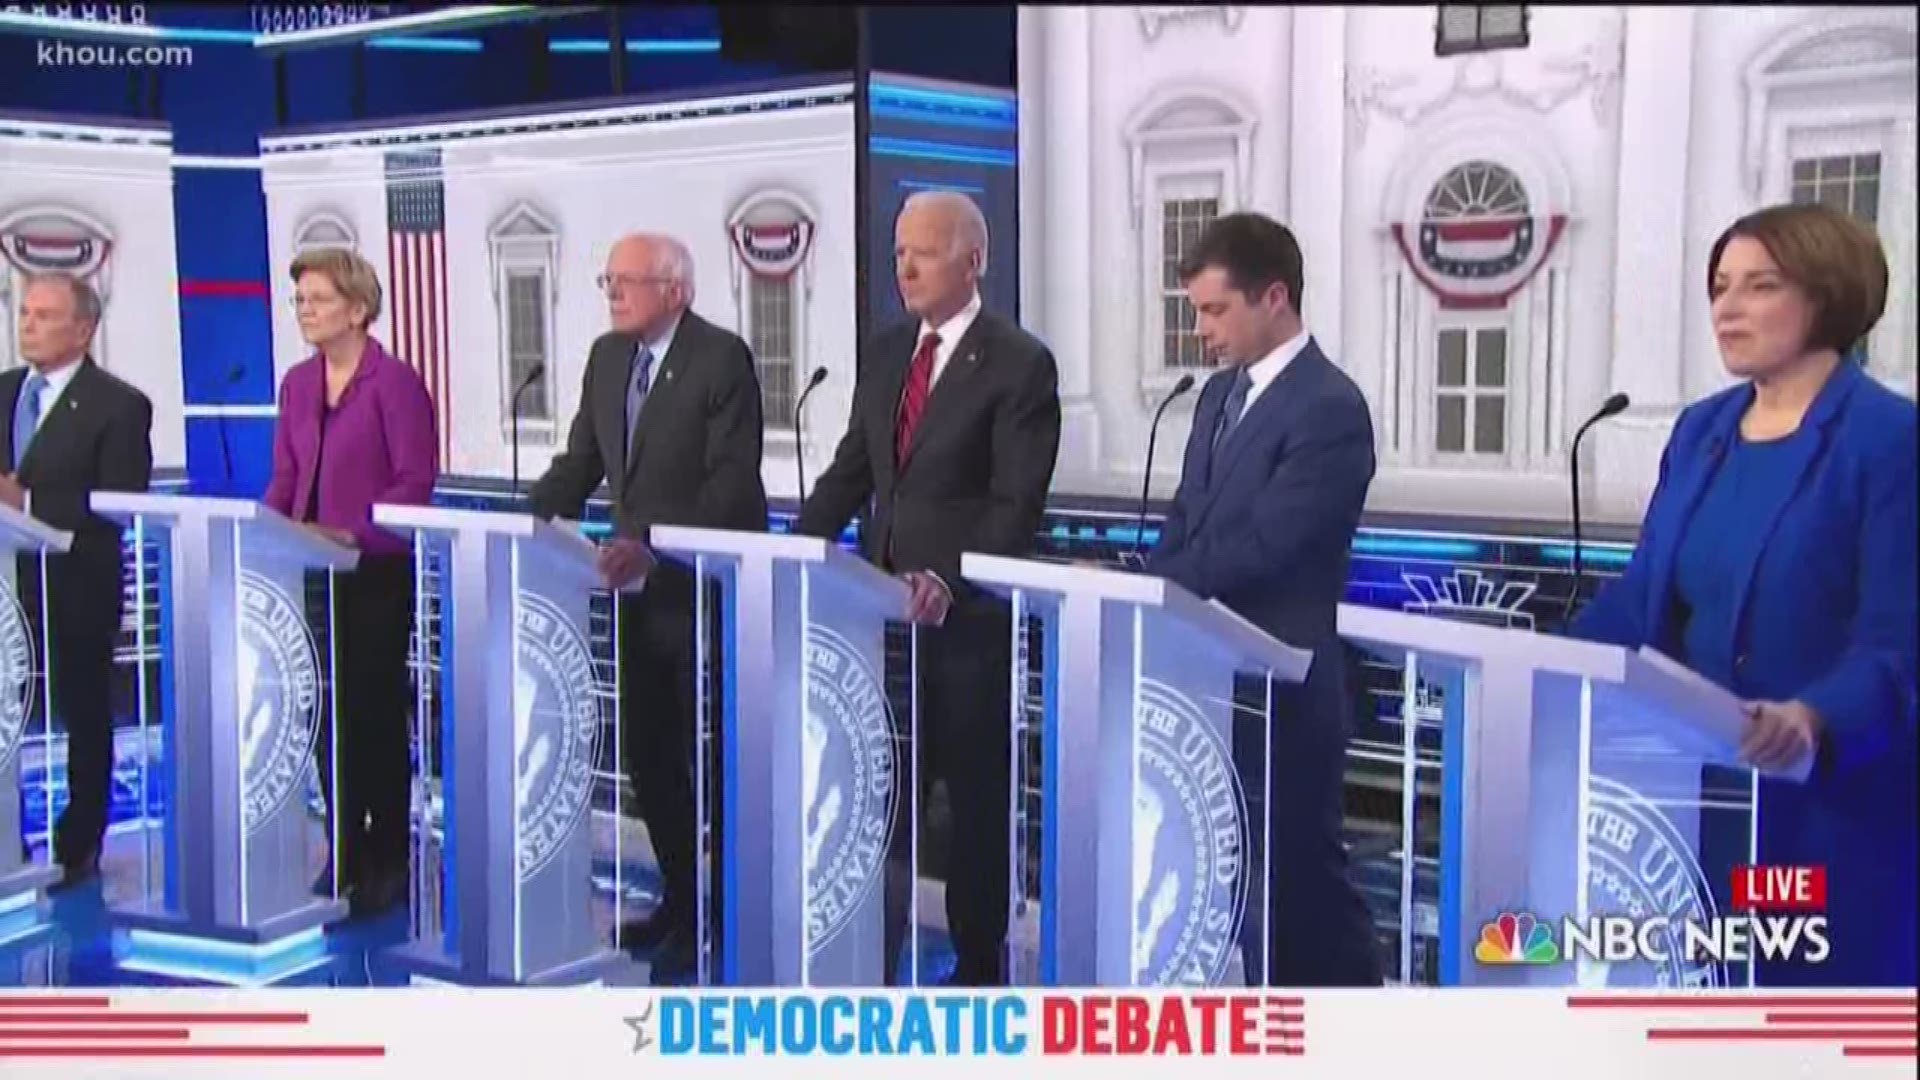 Chris Rogers is breaking down statements made during the Democratic debate. Find out what is true and what is  false.